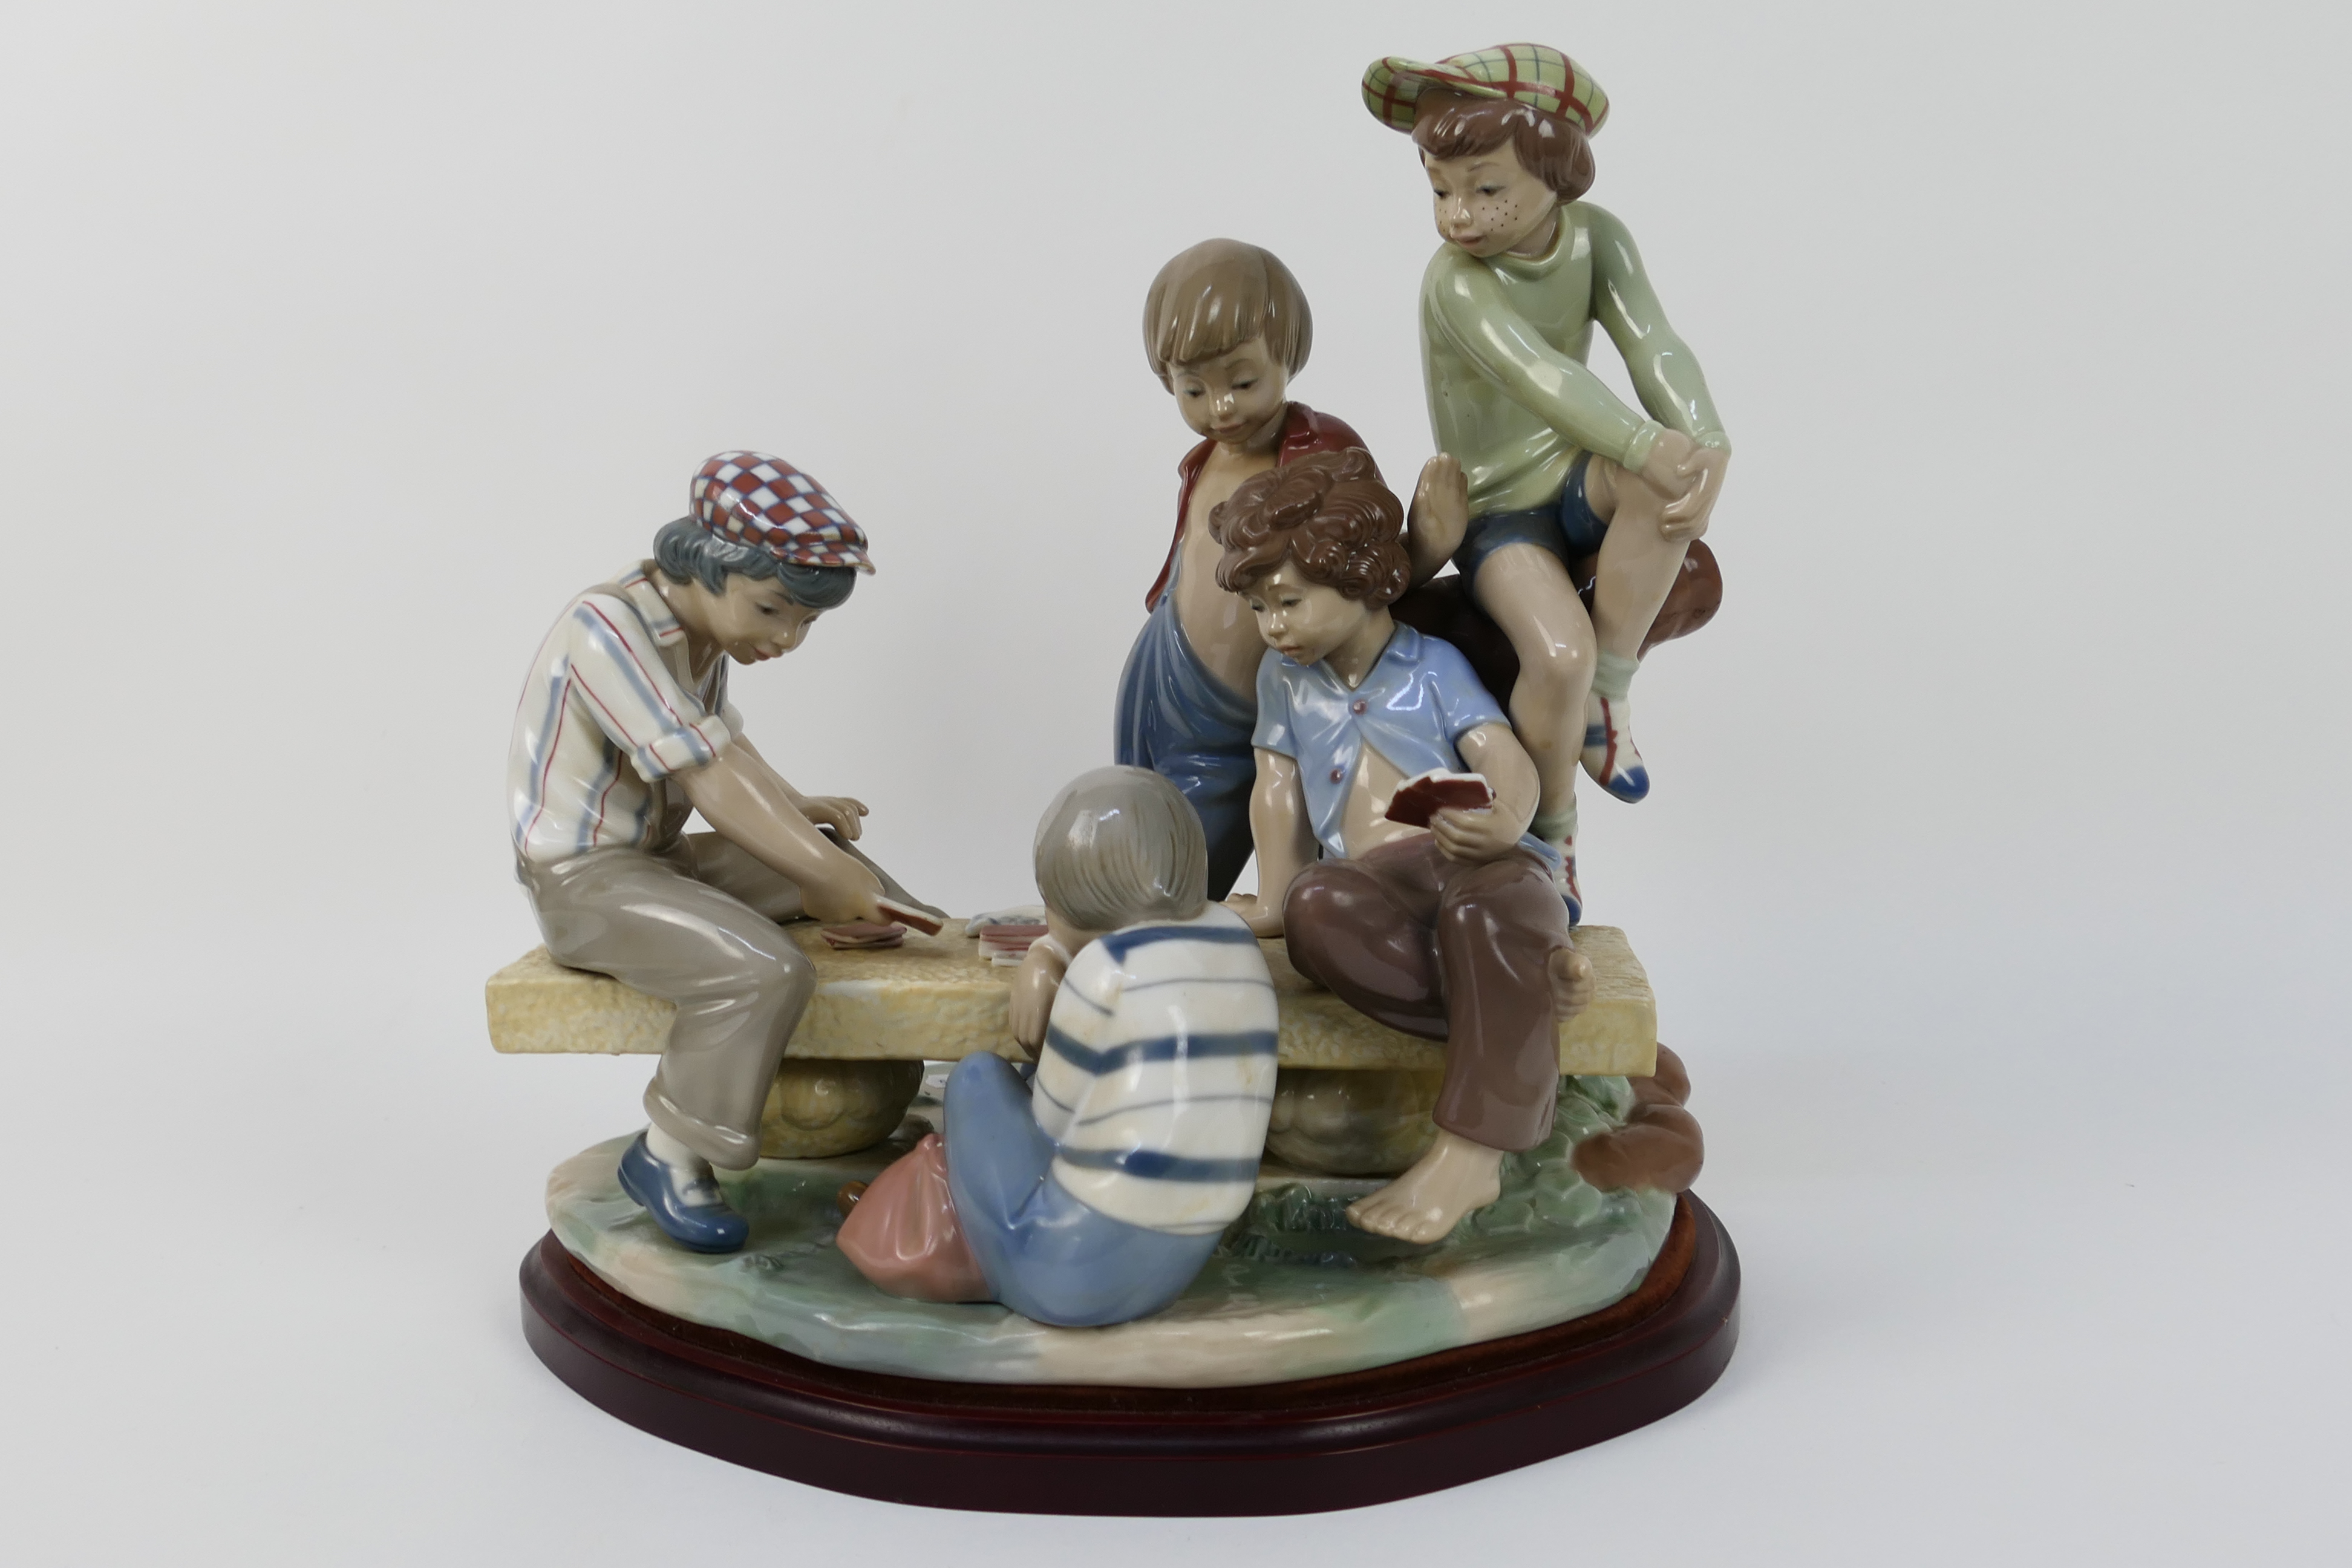 Nao by Lladro - a limited edition large